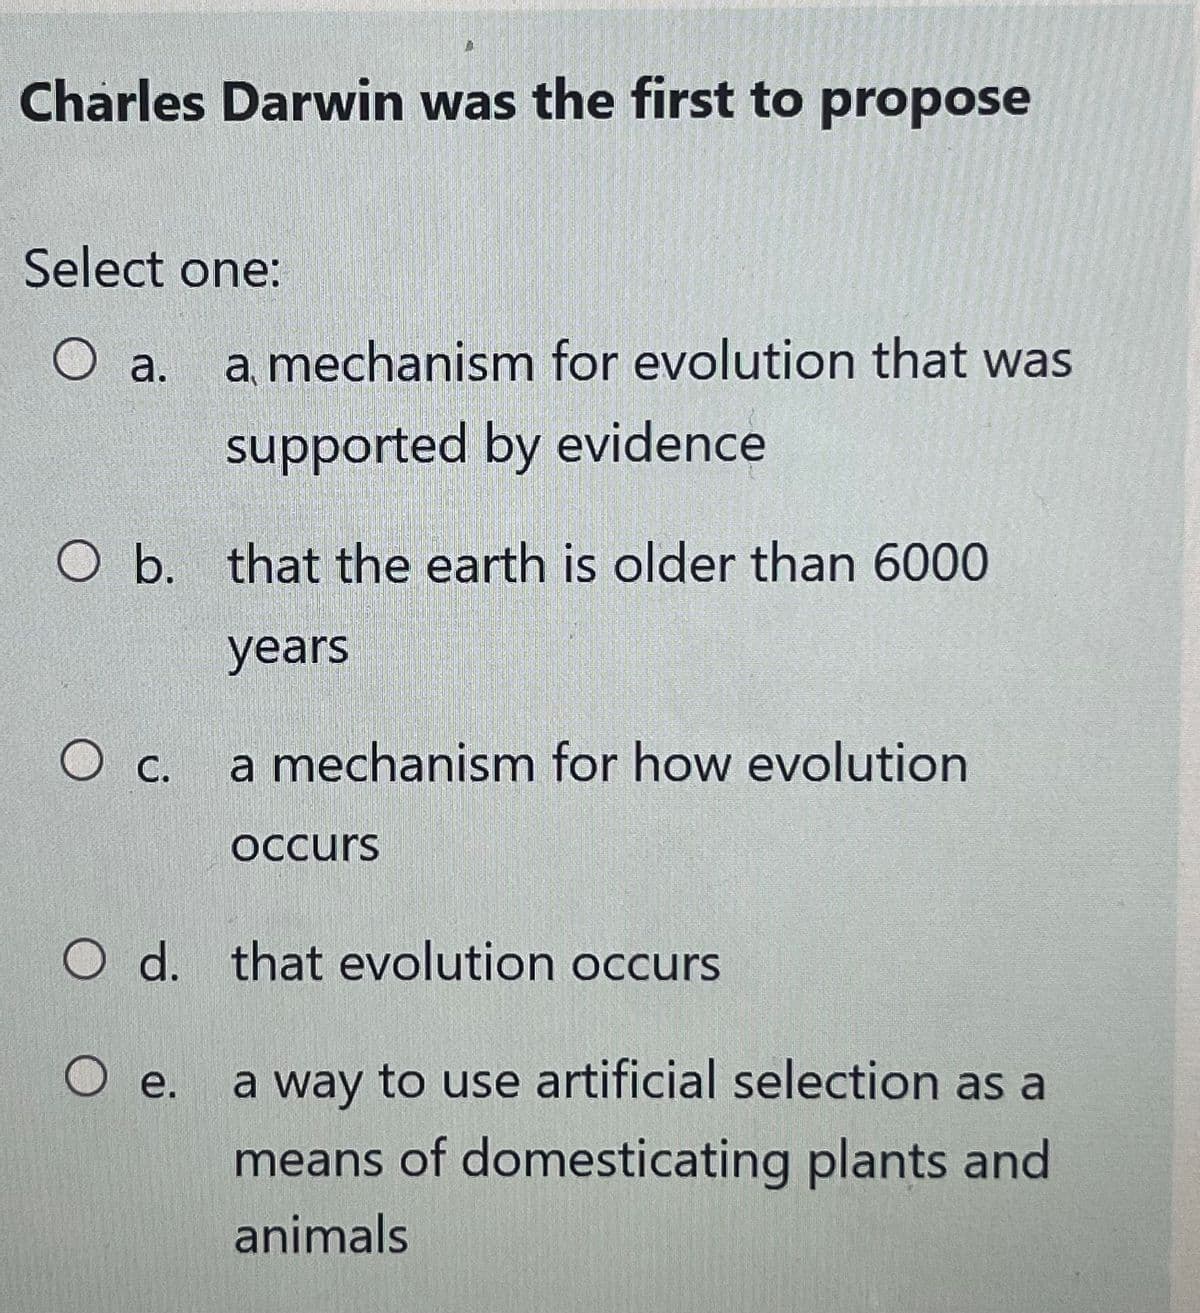 Charles Darwin was the first to propose
Select one:
O a.
a mechanism for evolution that was
supported by evidence
O b. that the earth is older than 6000
years
O c. a mechanism for how evolution
occurs
O d. that evolution occurs
O e. a way to use artificial selection as a
means of domesticating plants and
animals